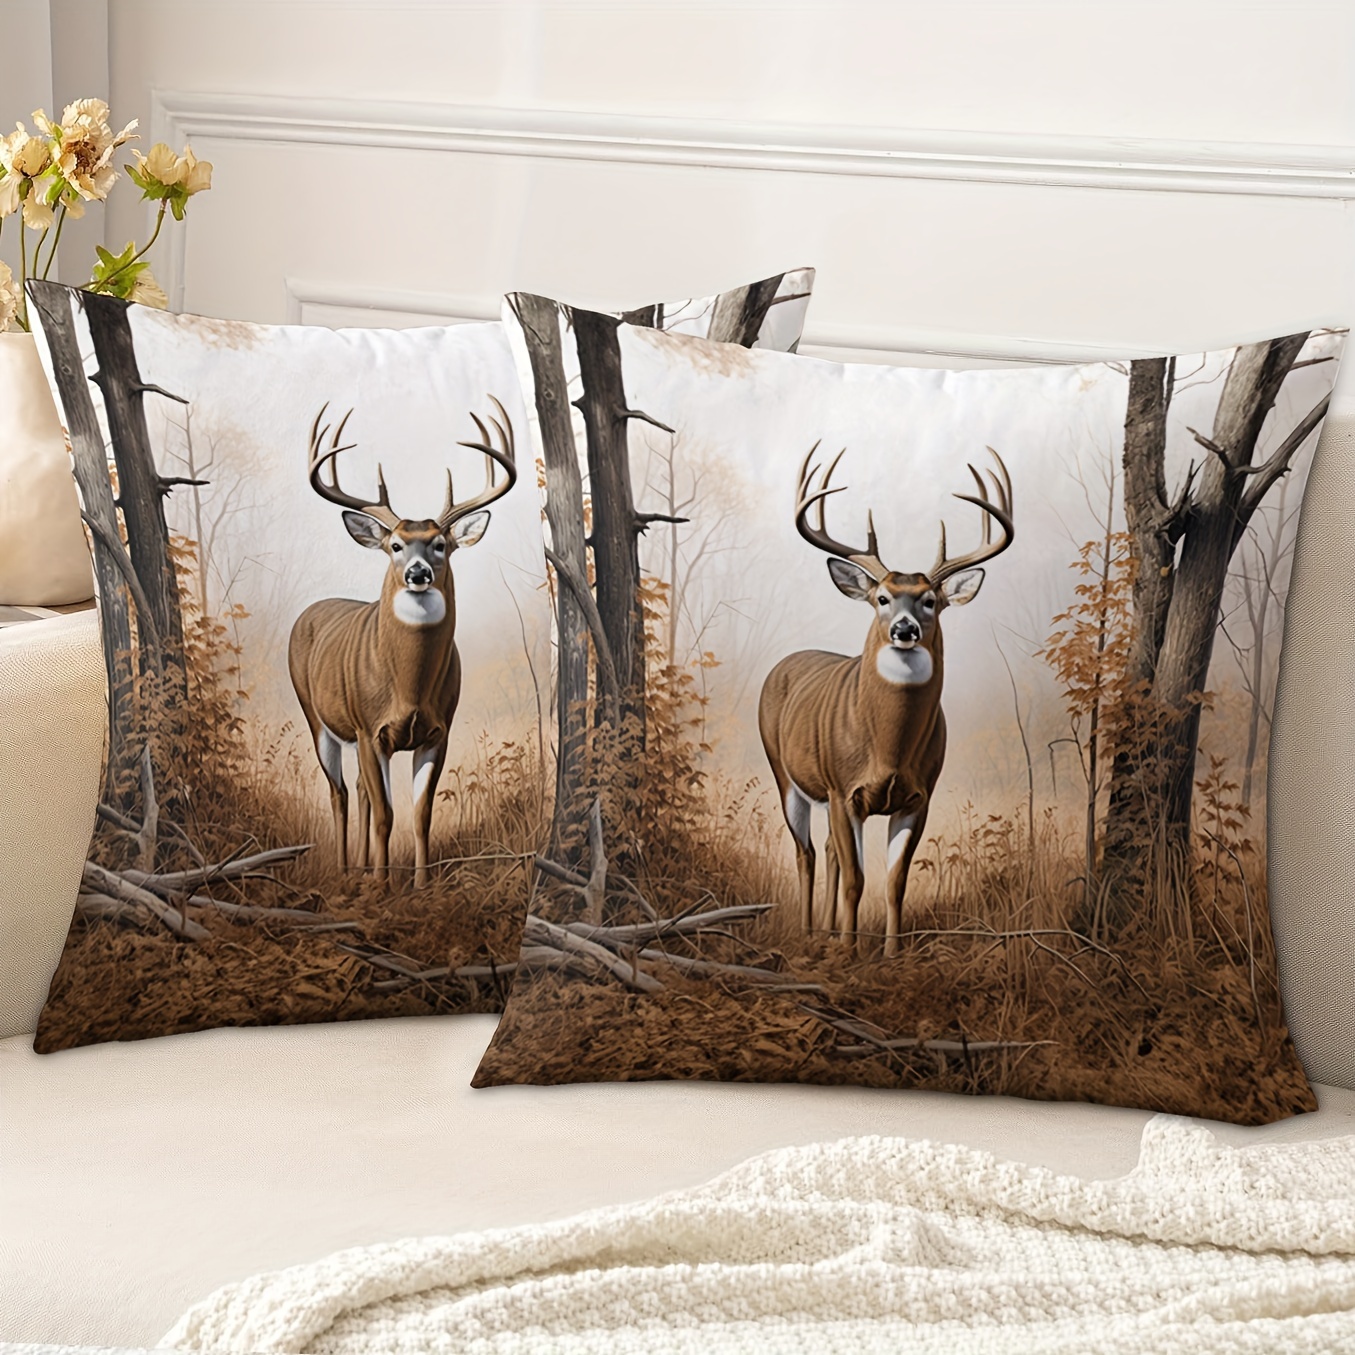 

2-piece Brown Deer Forest Throw Pillow Covers - Soft, Double-sided Print, Zip Closure For Easy Care - Perfect For Living Room & Bedroom Decor (pillow Not Included)